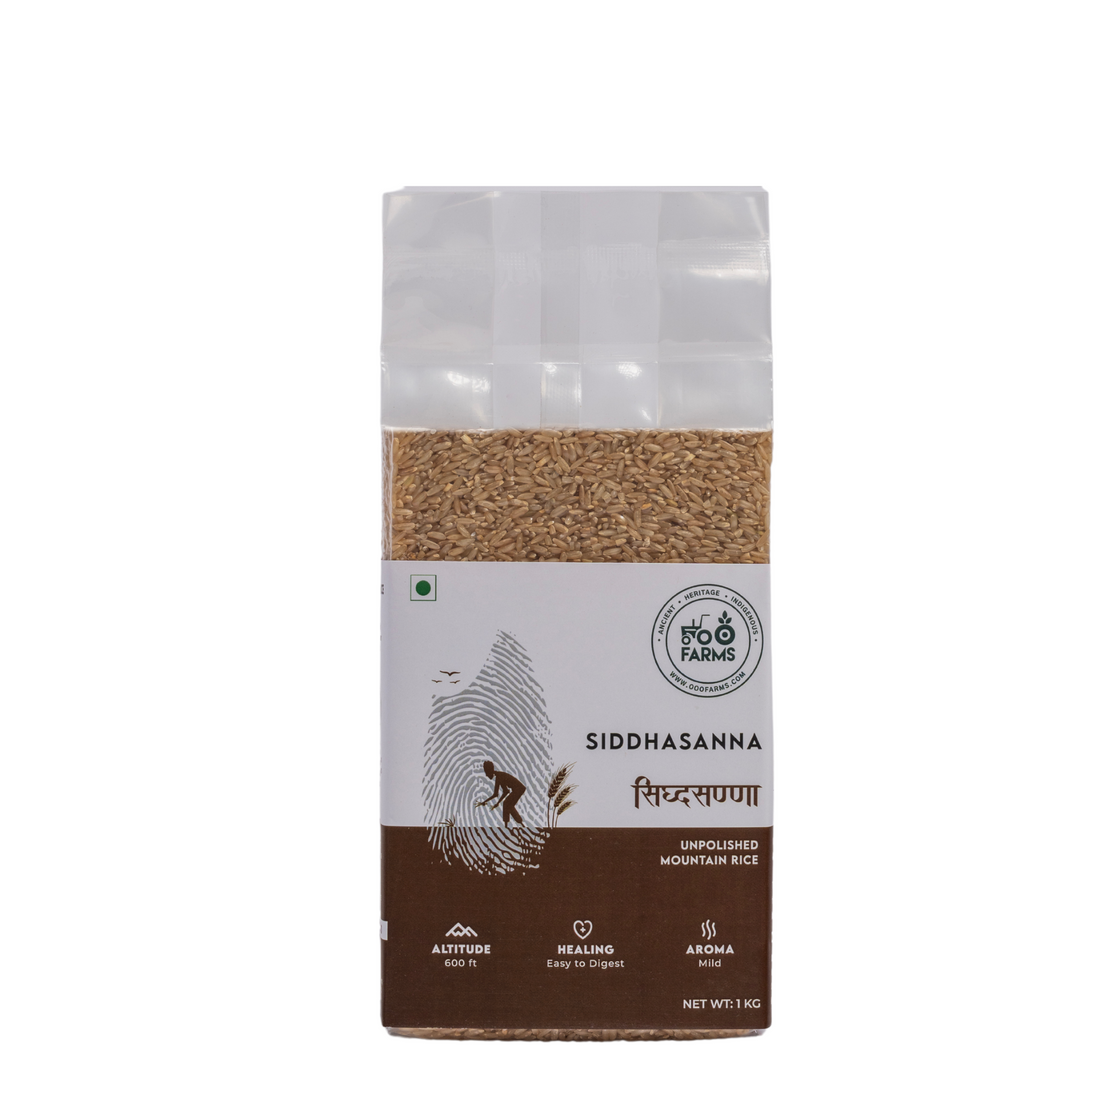 OOO Farms Siddhasanna Rice (Unpolished) Package Frontside